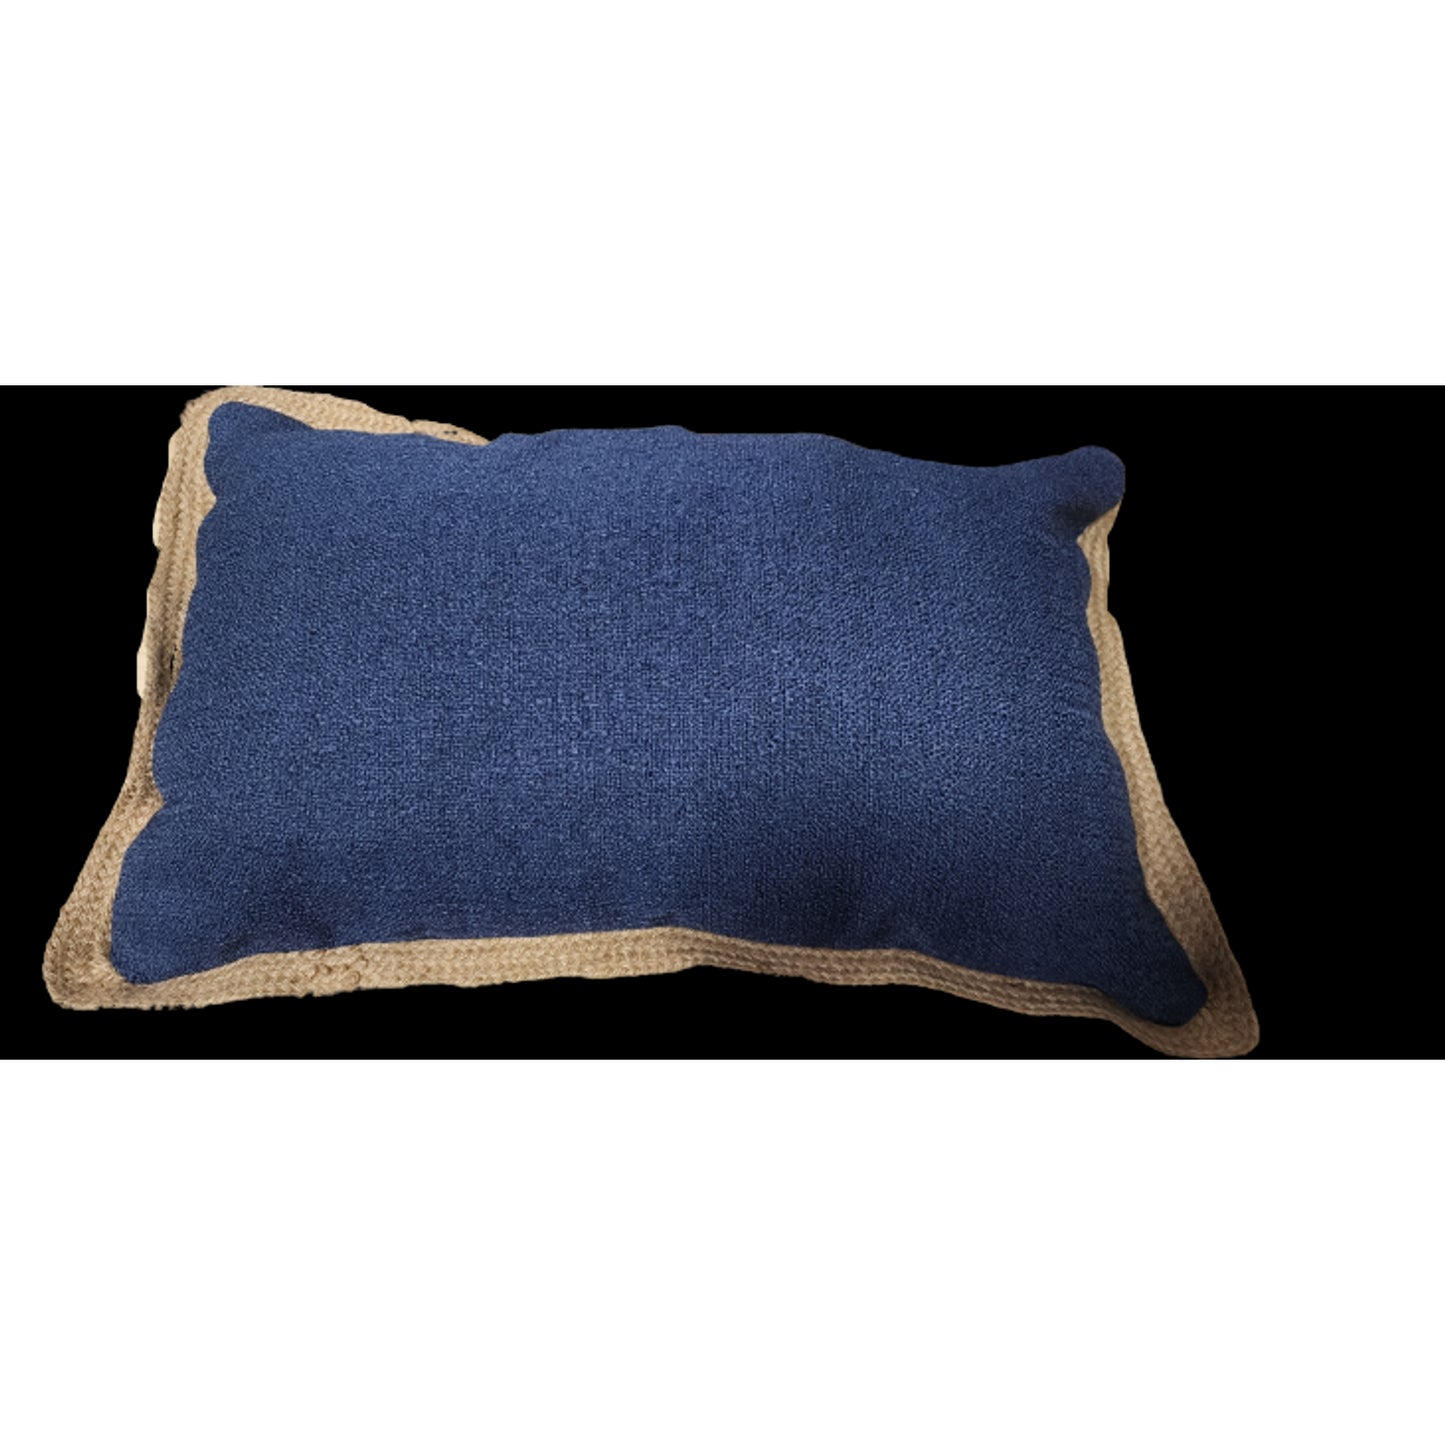 Home Fashions Pillow with Burlap Trim, 14 In x 22 In